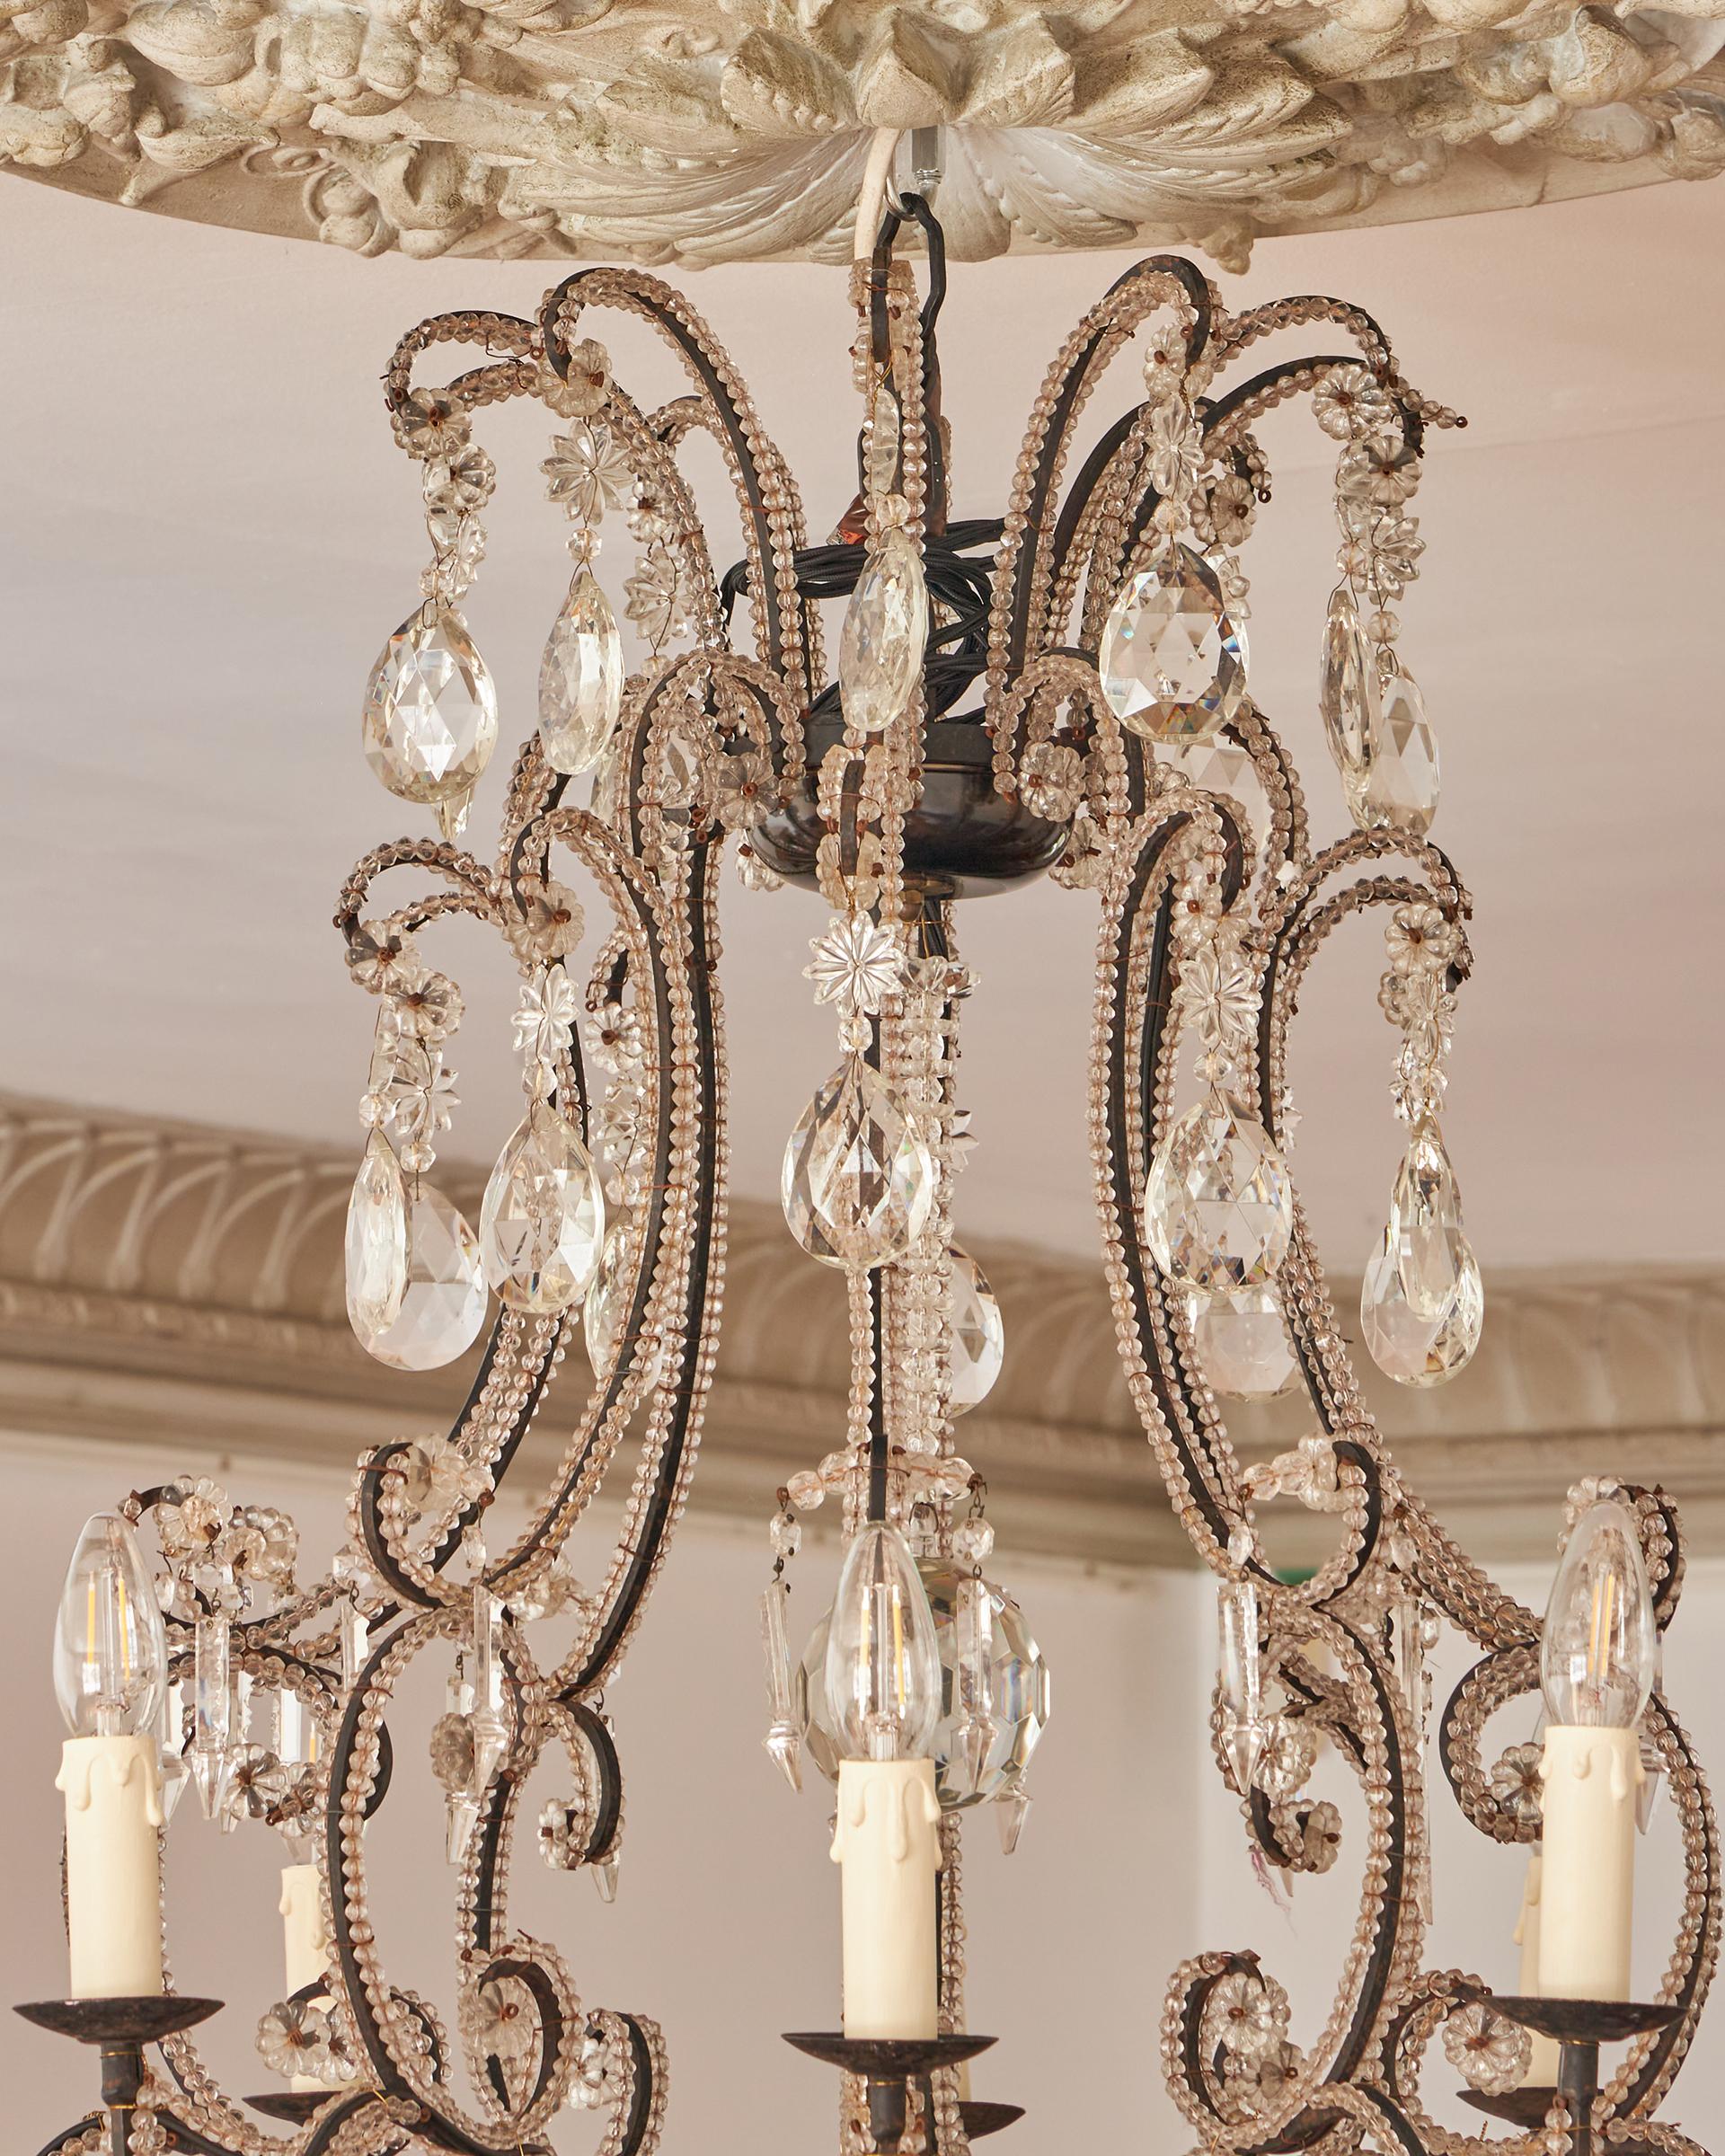 Large 19th Century Italian Chandelier fine crystal and iron ten light chandelier For Sale 3